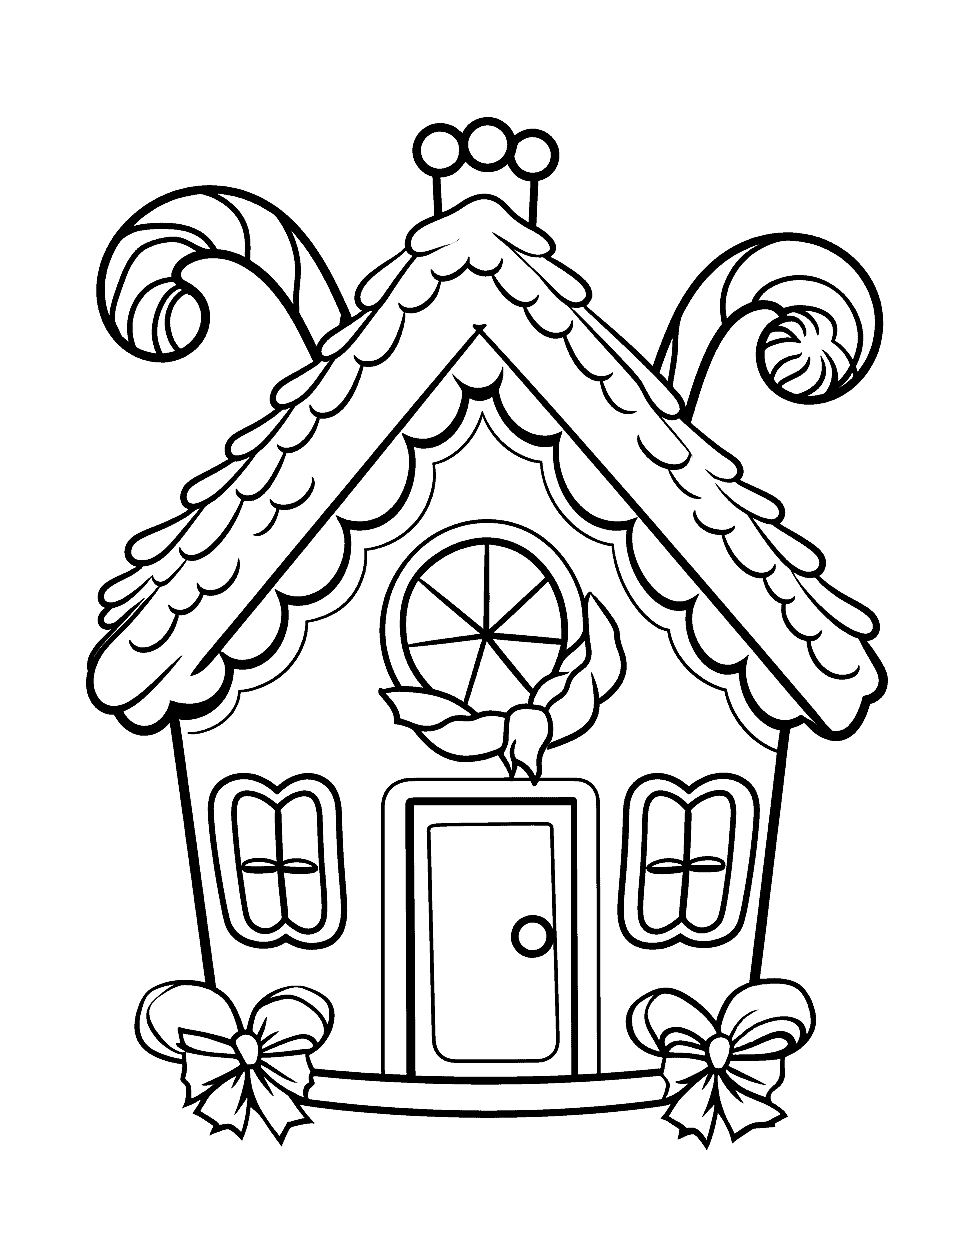 Gingerbread House Christmas Coloring Page - A detailed and appetizing gingerbread house with gumdrop decorations and a frosting roof.